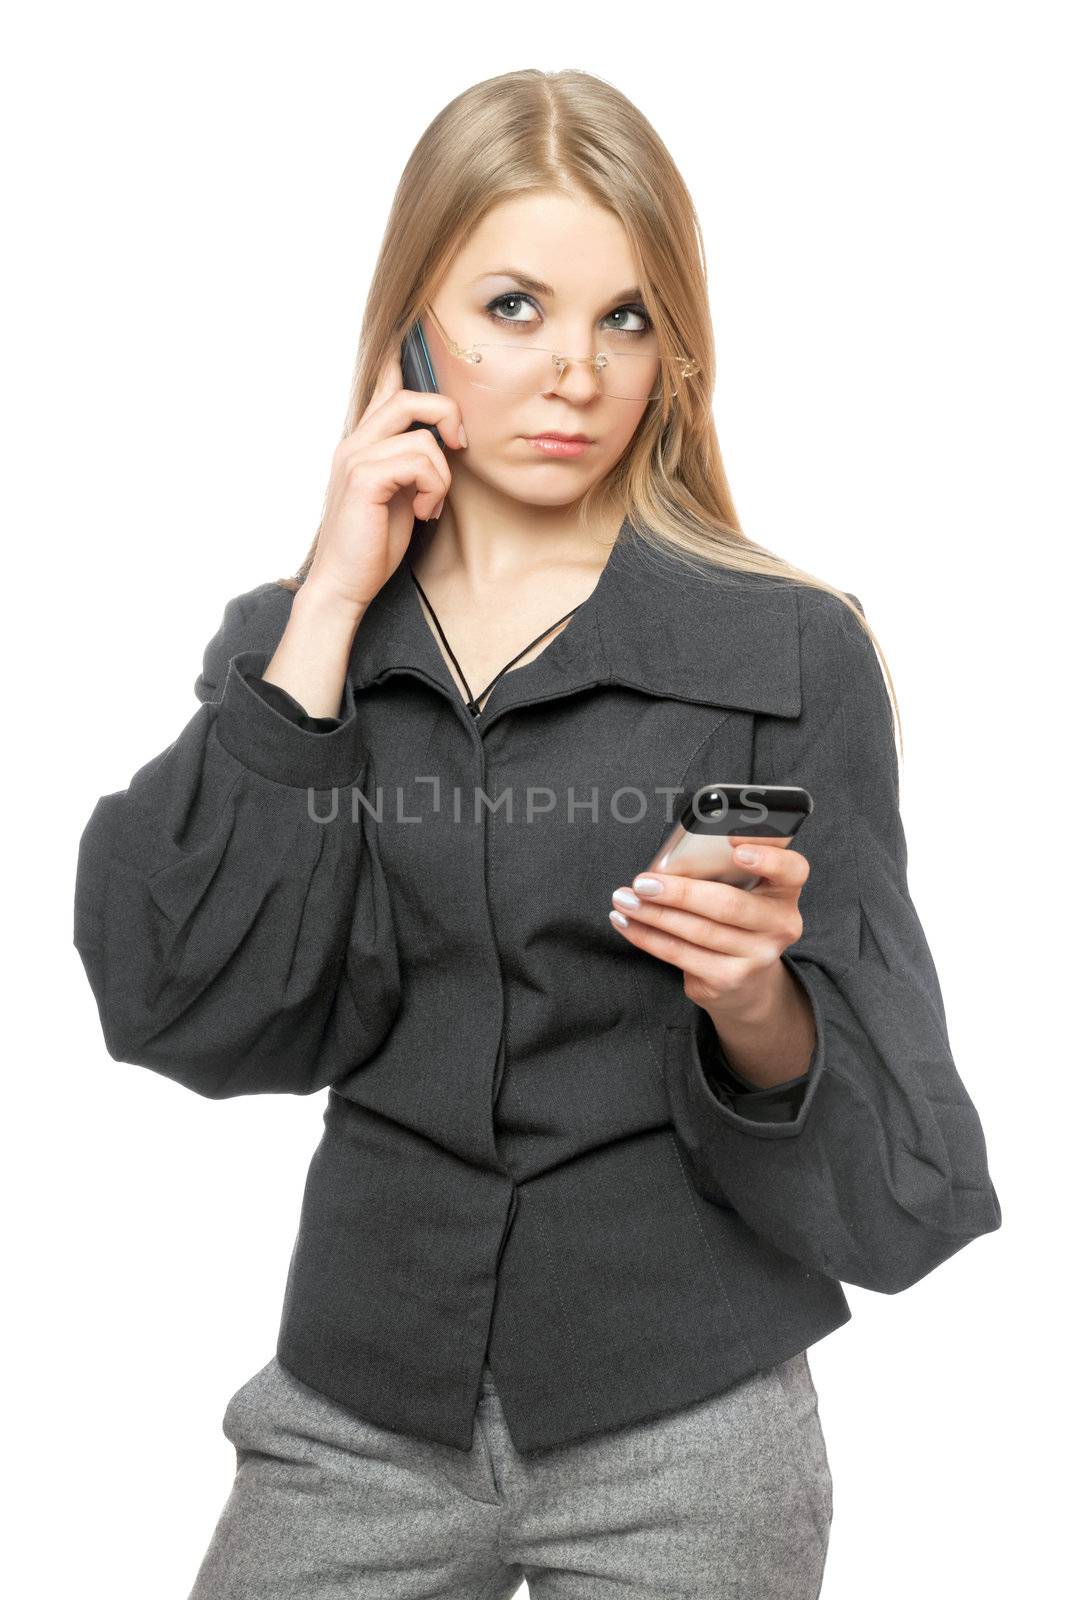 Portrait of thoughtful young blonde in a gray business suit with two phones